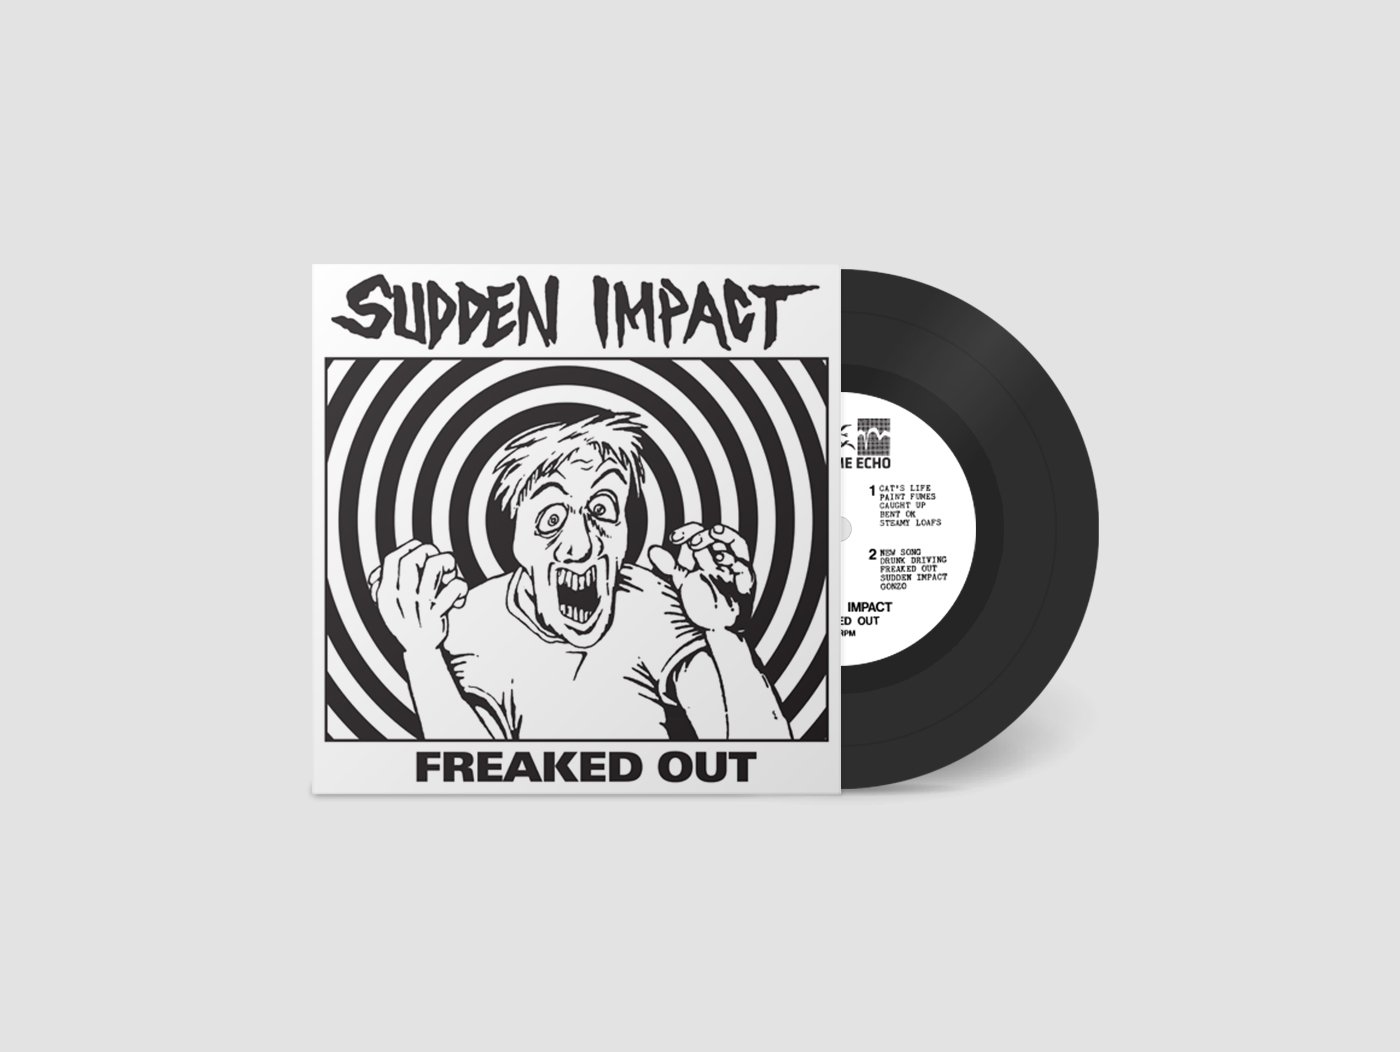 Image of SUDDEN IMPACT - “Freaked Out” 7” 